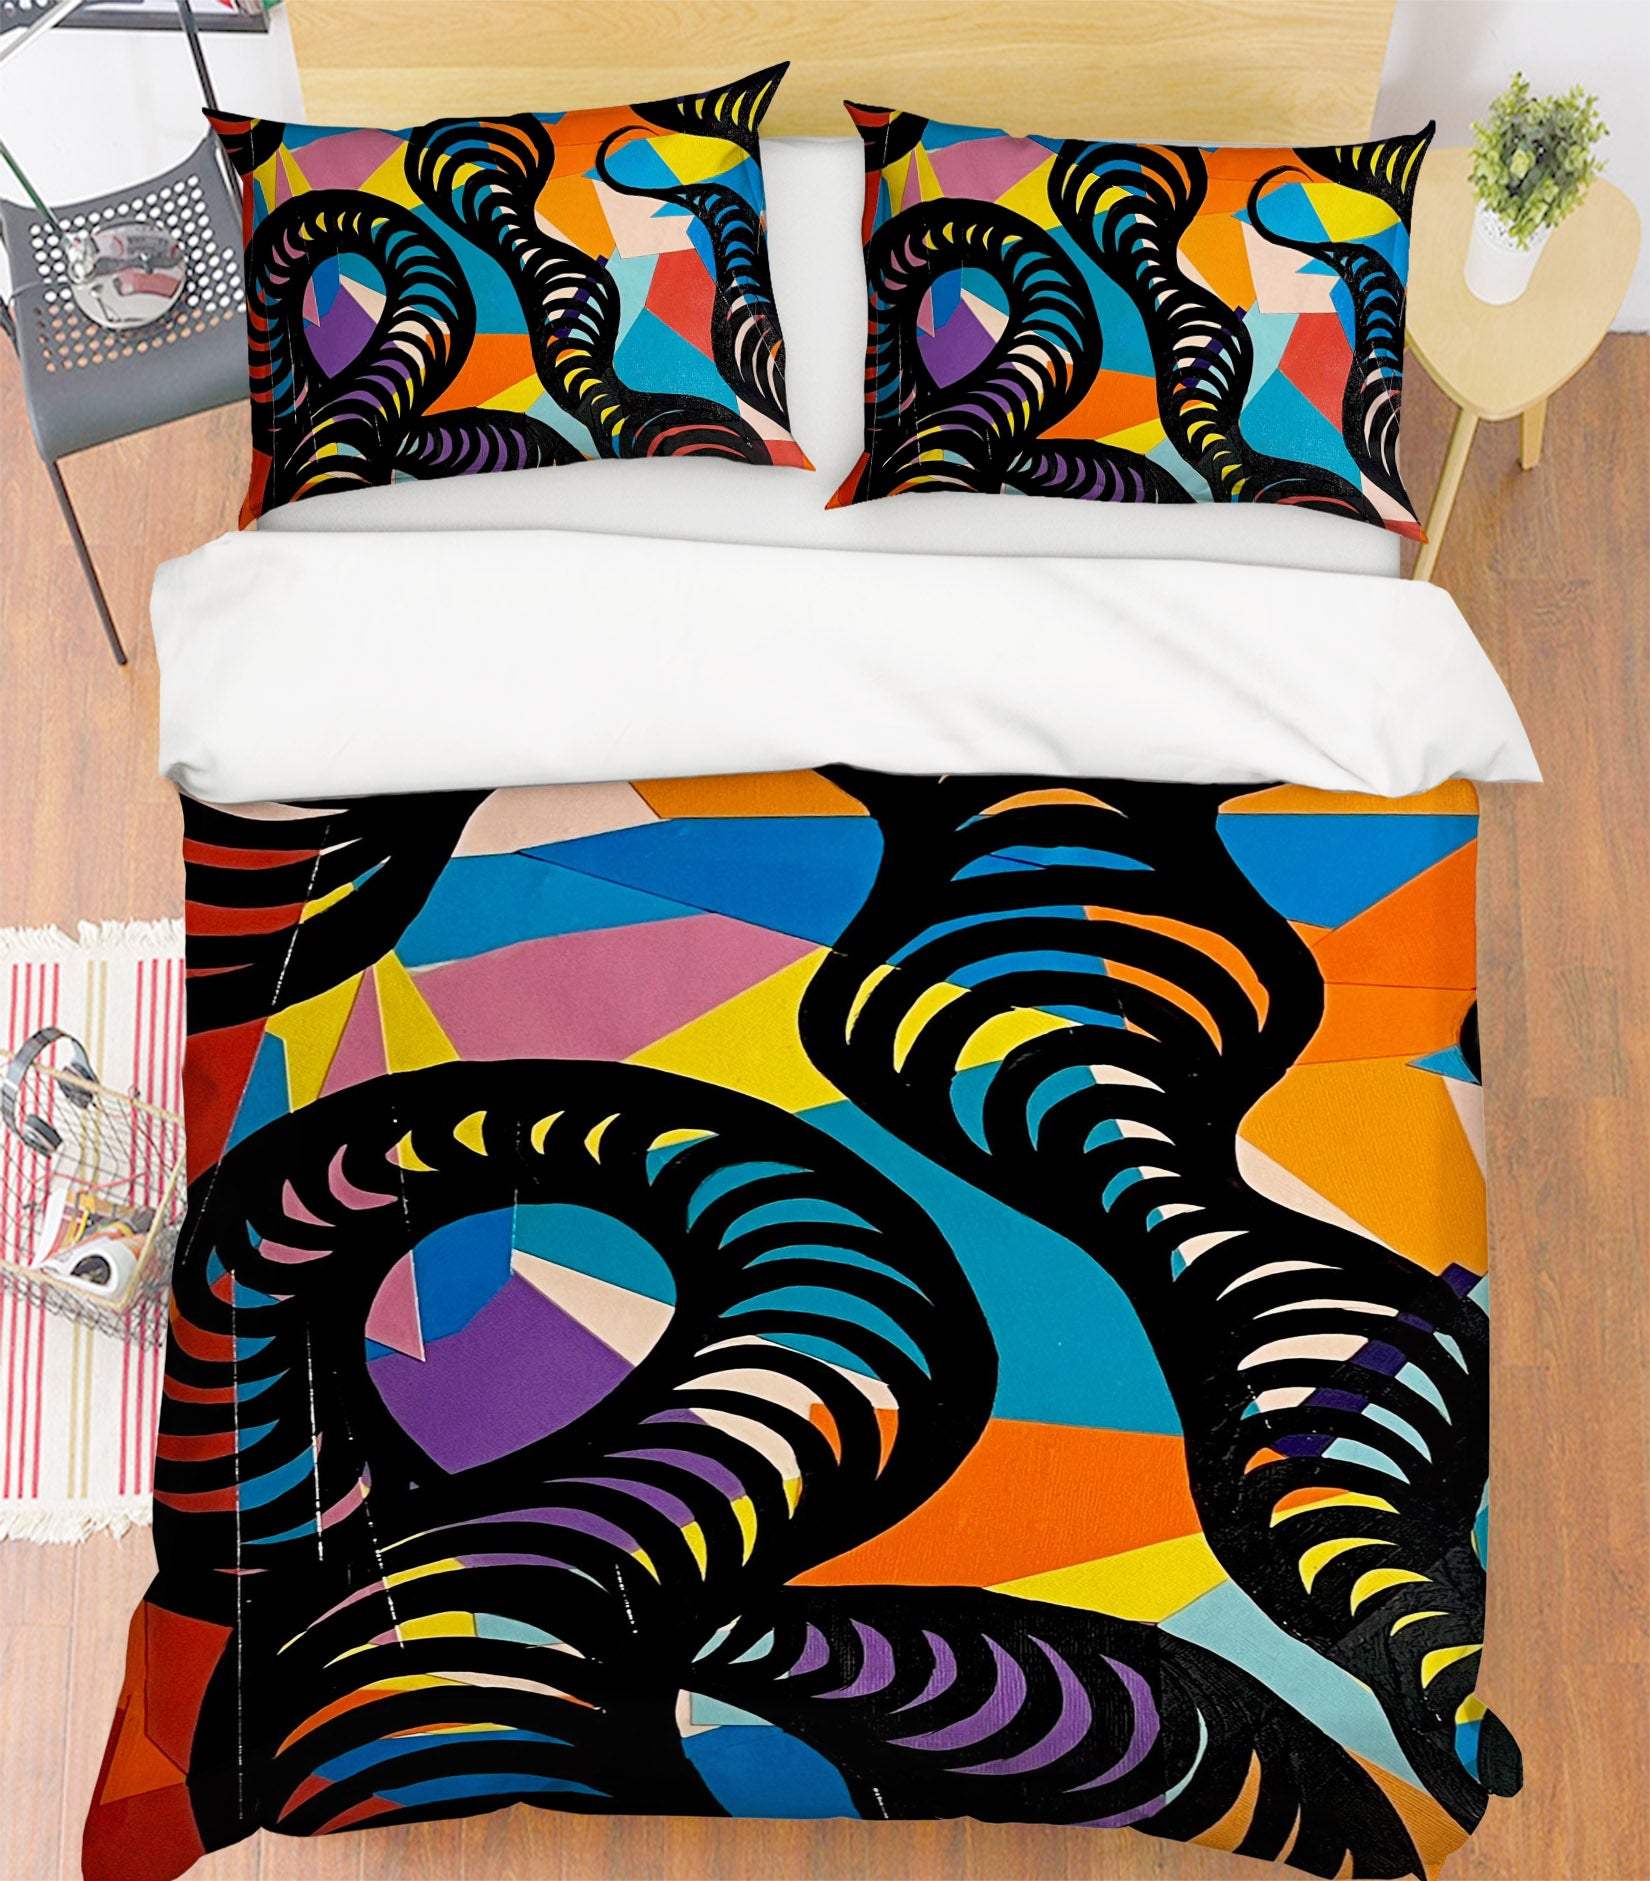 3D Painted Graphics 3042 Jacqueline Reynoso Bedding Bed Pillowcases Quilt Cover Duvet Cover